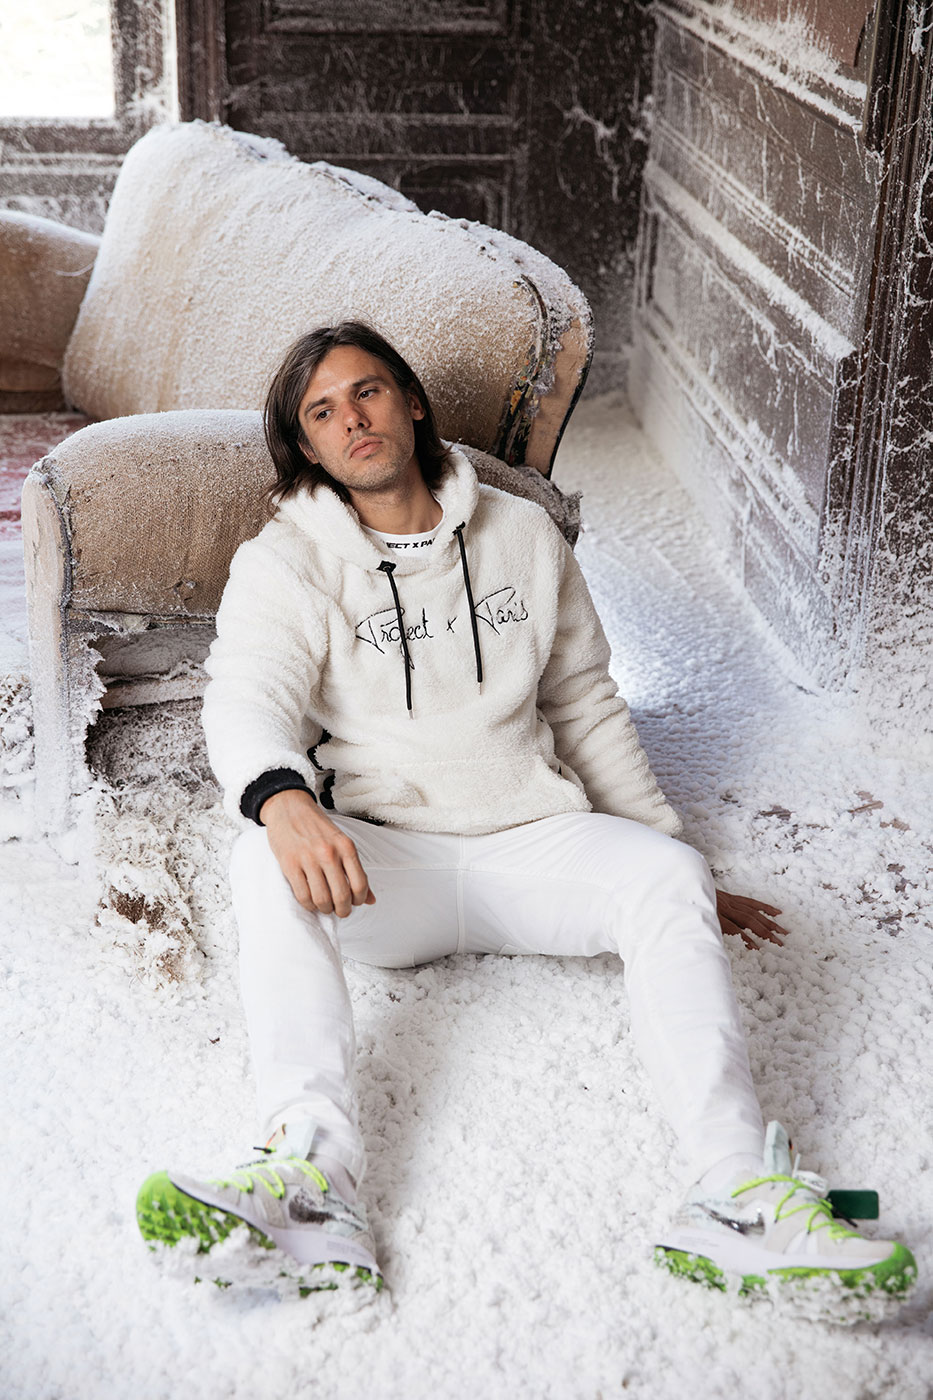 Orelsan collaborates with project X the streetwear brand